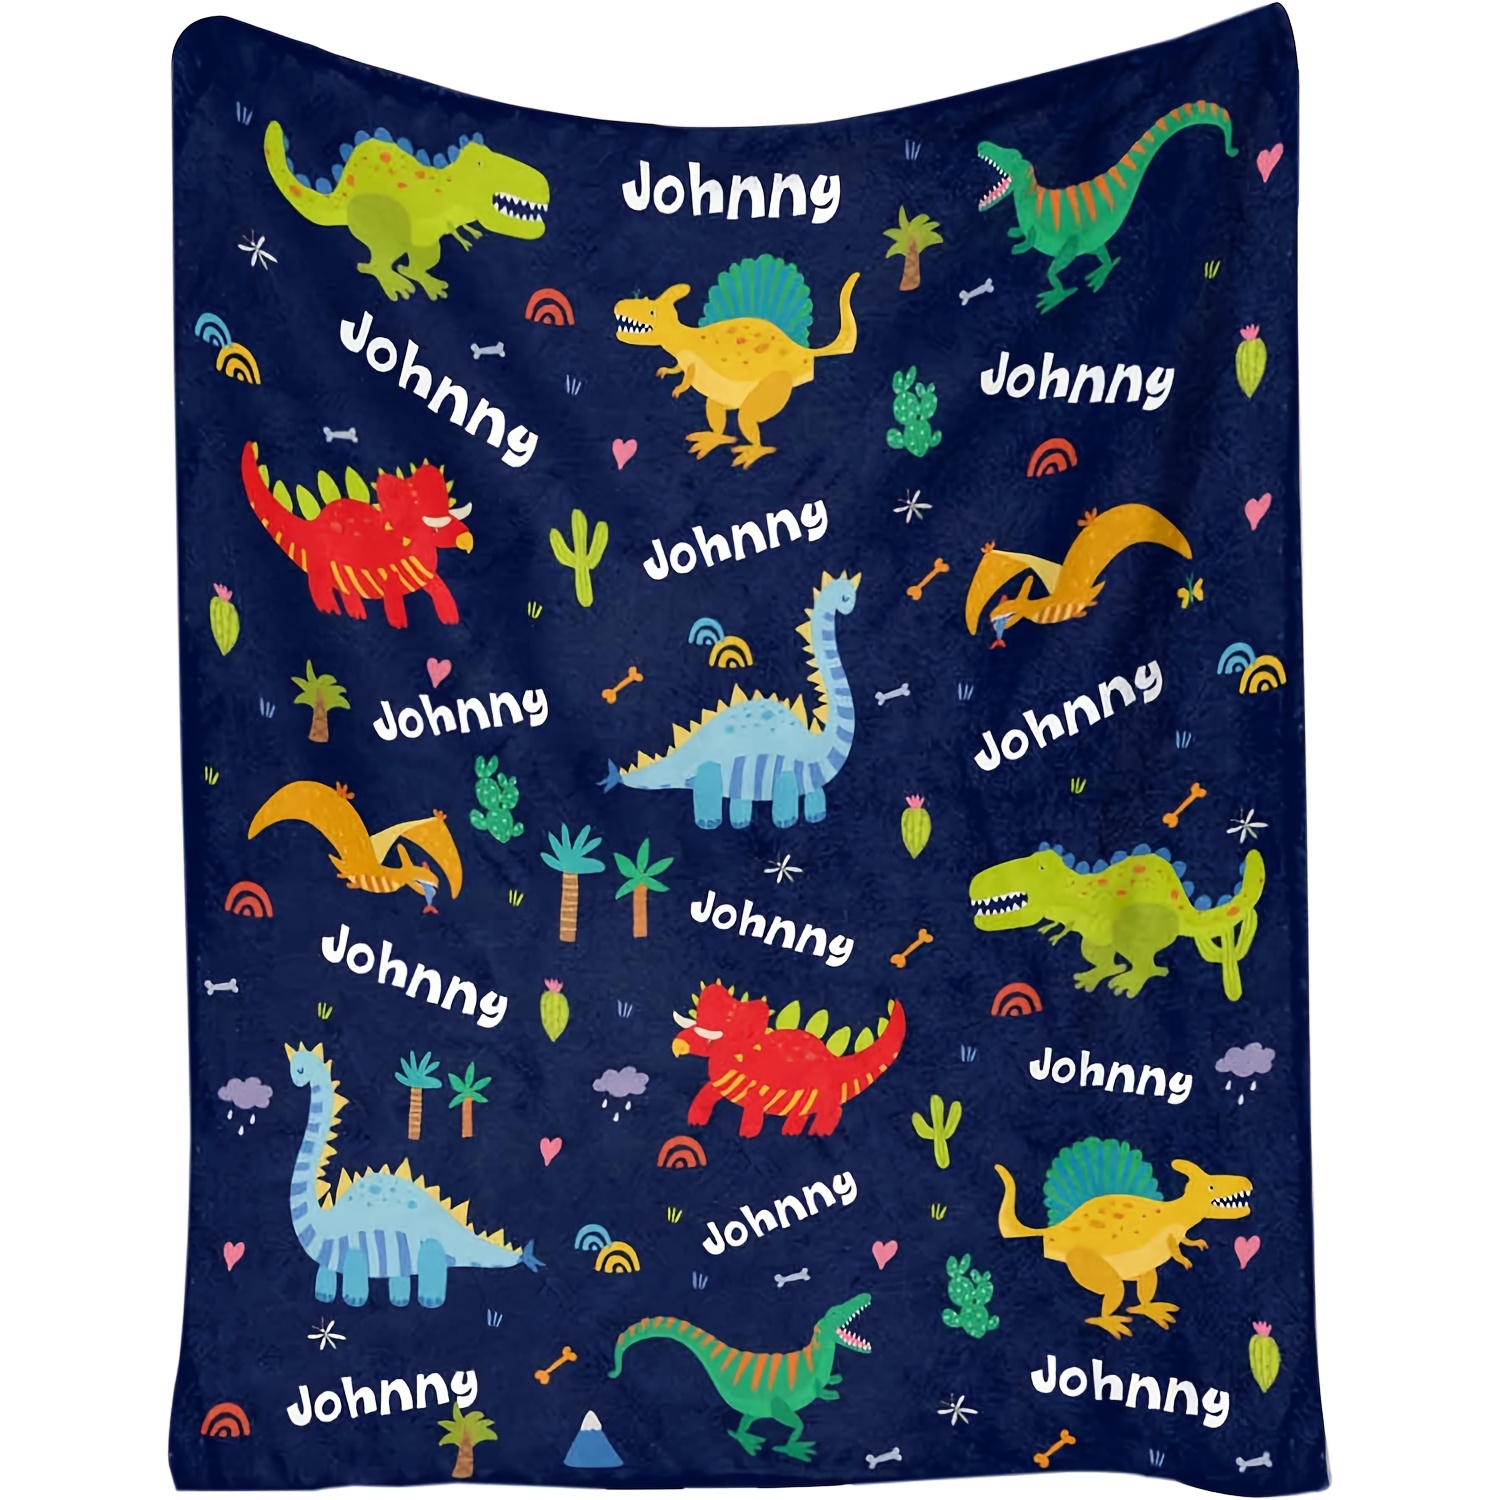 

Custom Dinosaur Pattern Name Blanket - Soft & Warm Flannel, Perfect For Sofa, Bed, Travel, Camping, Living Room, Office - Machine Washable, All-season Gift For Friends & Family